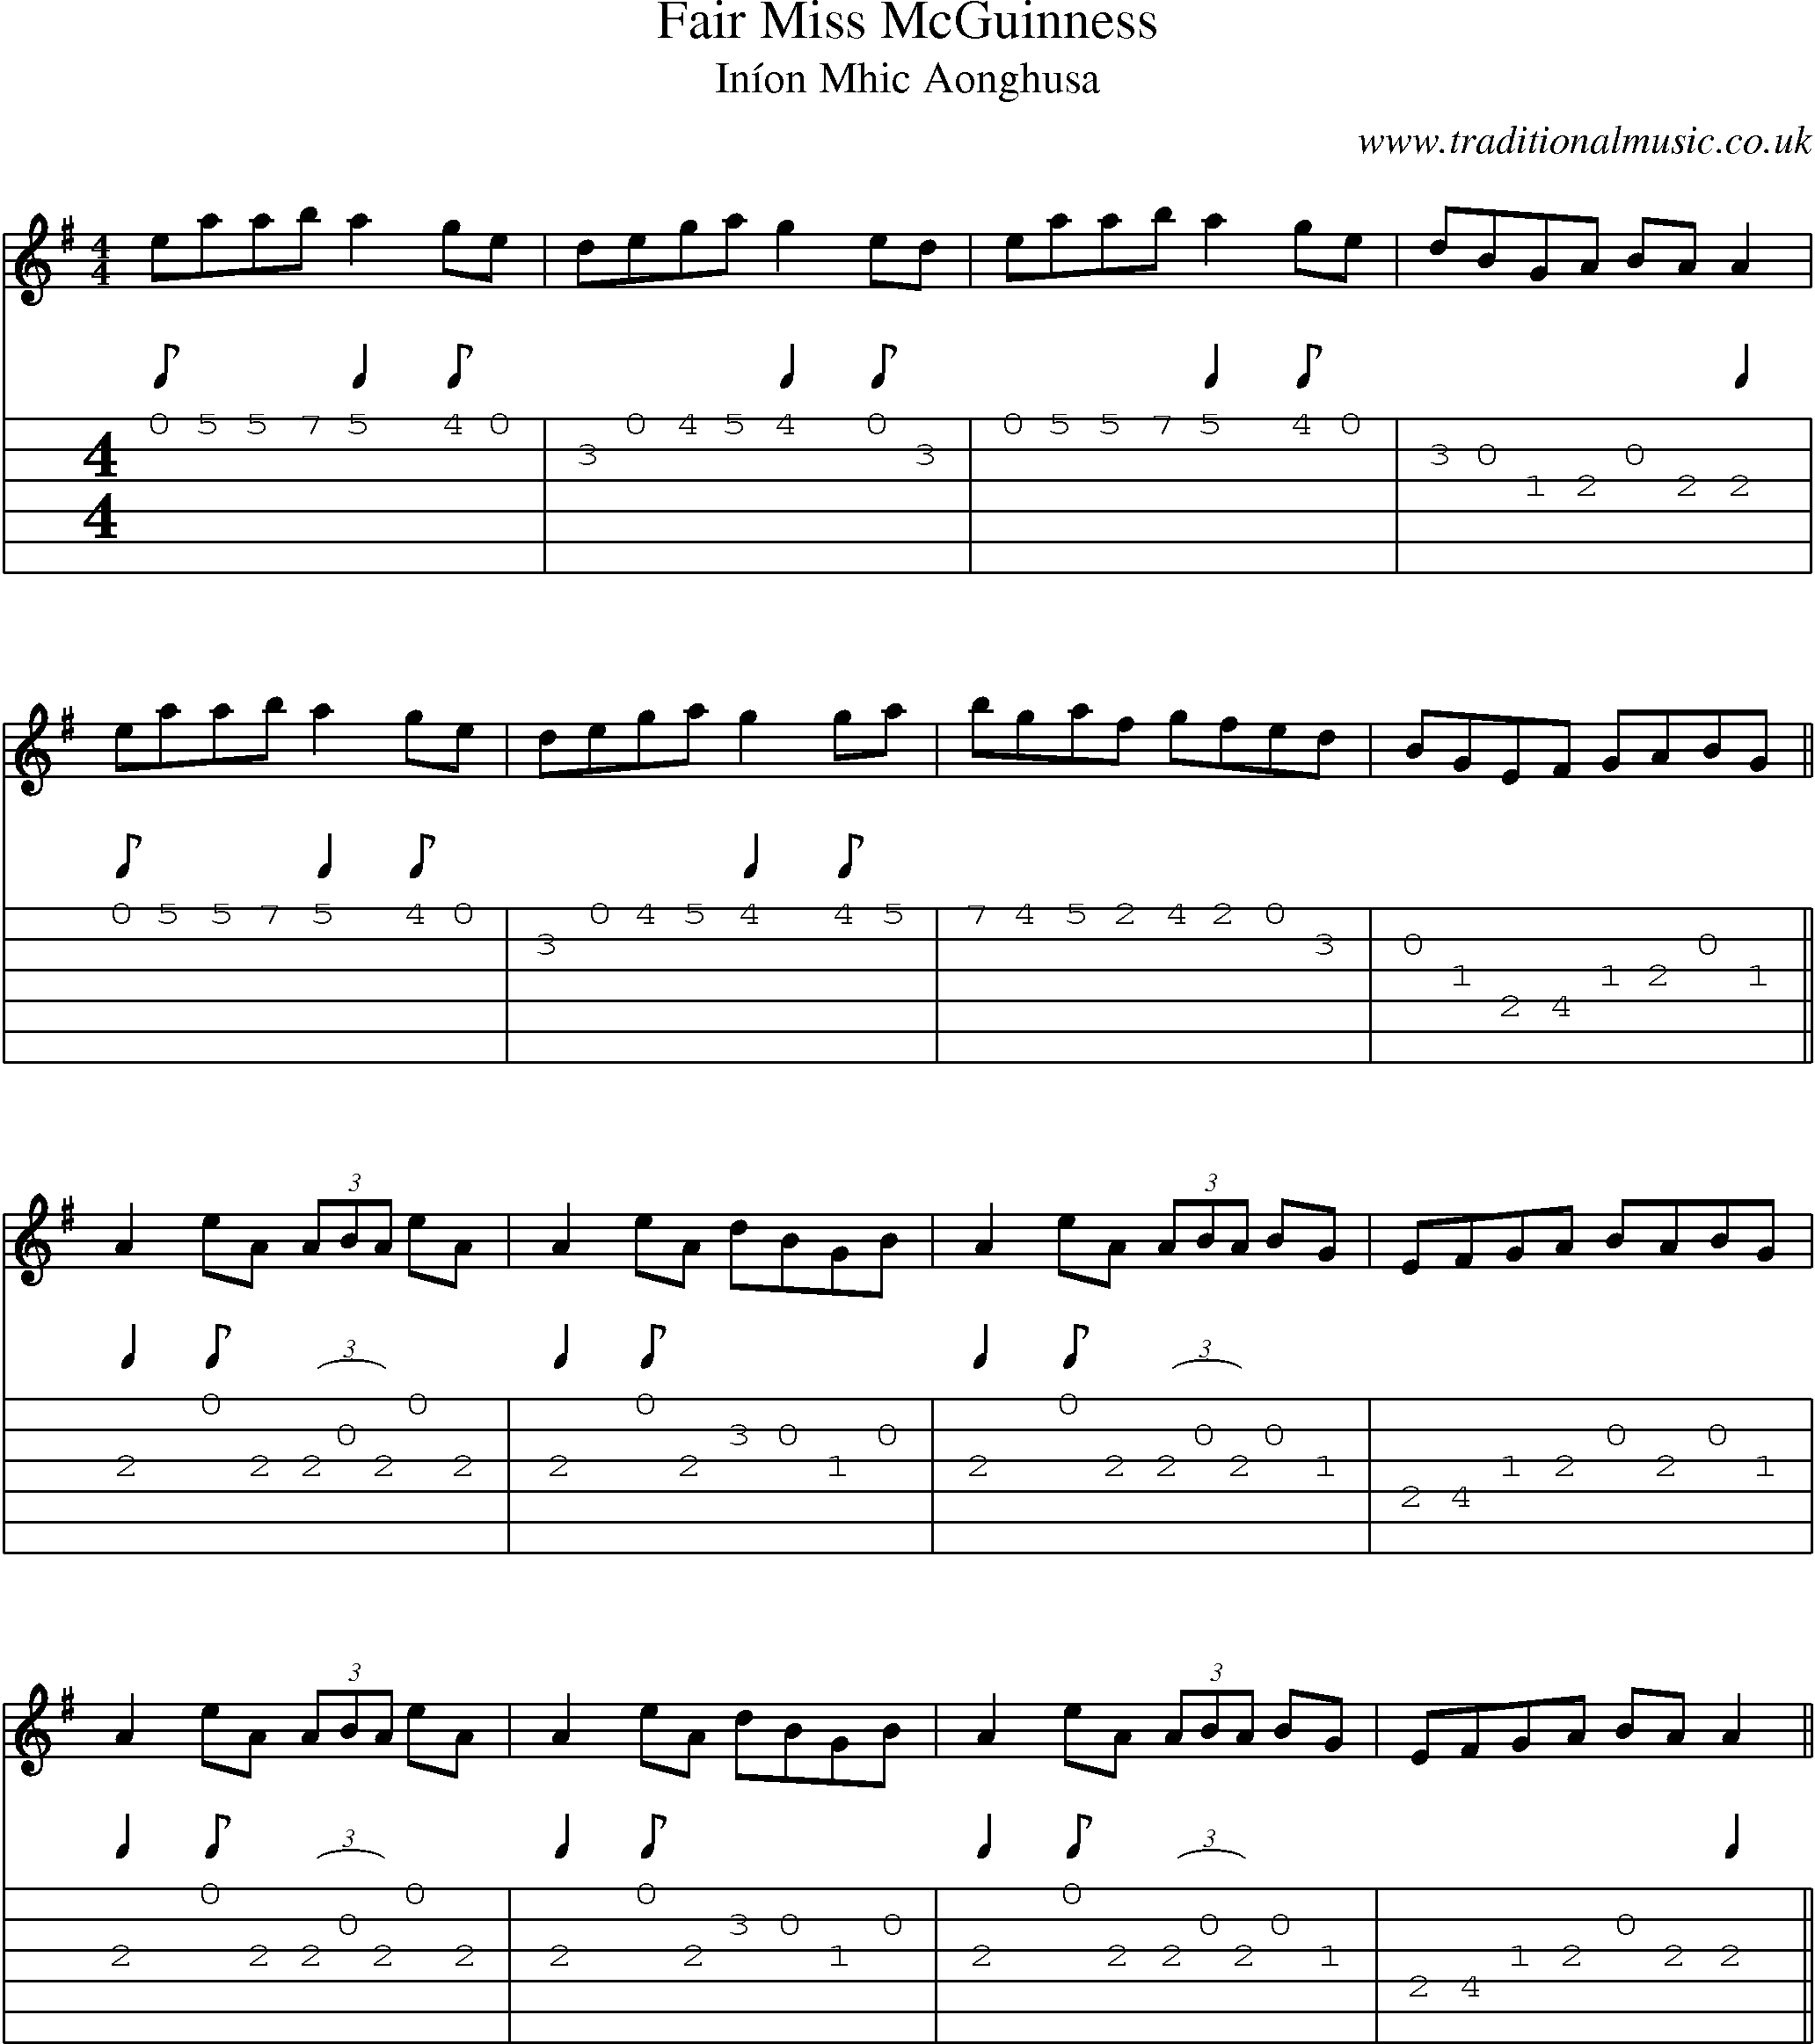 Music Score and Guitar Tabs for Fair Miss Mcguinness